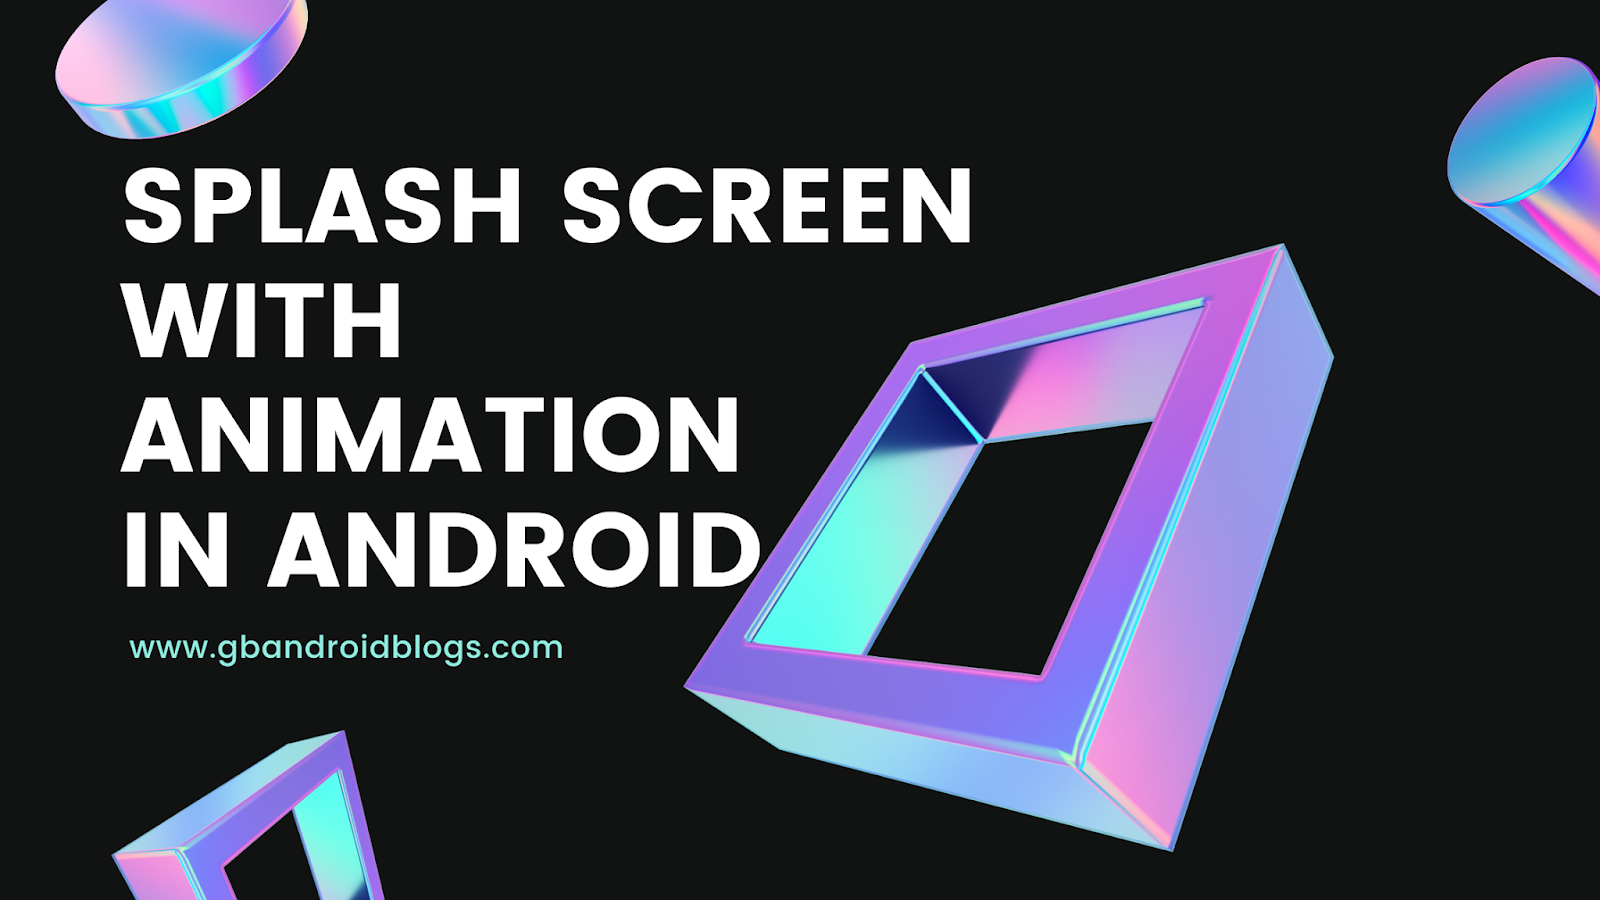 Splash Screen with Animation in Android